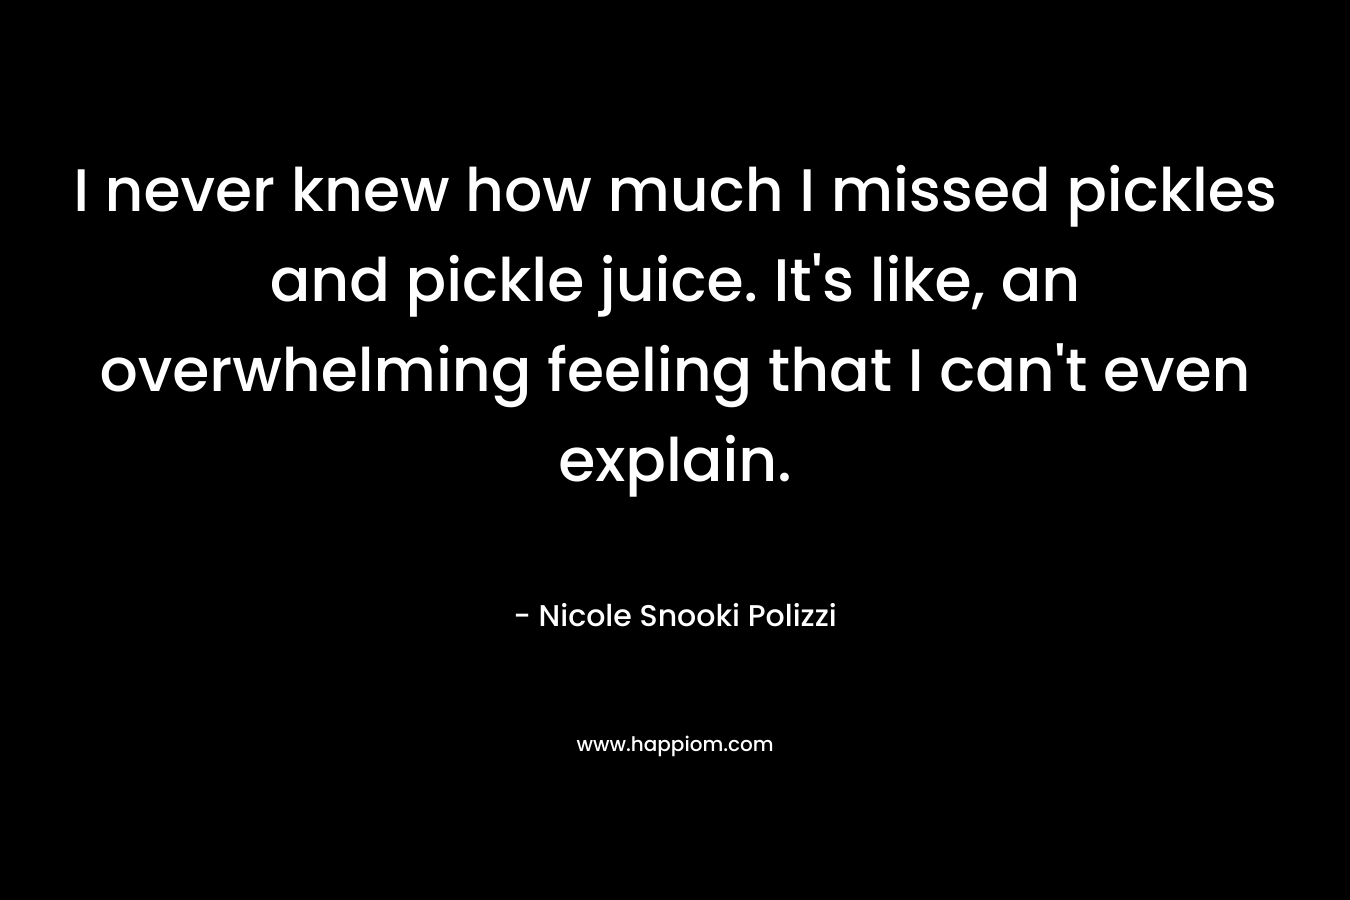 I never knew how much I missed pickles and pickle juice. It’s like, an overwhelming feeling that I can’t even explain. – Nicole Snooki Polizzi